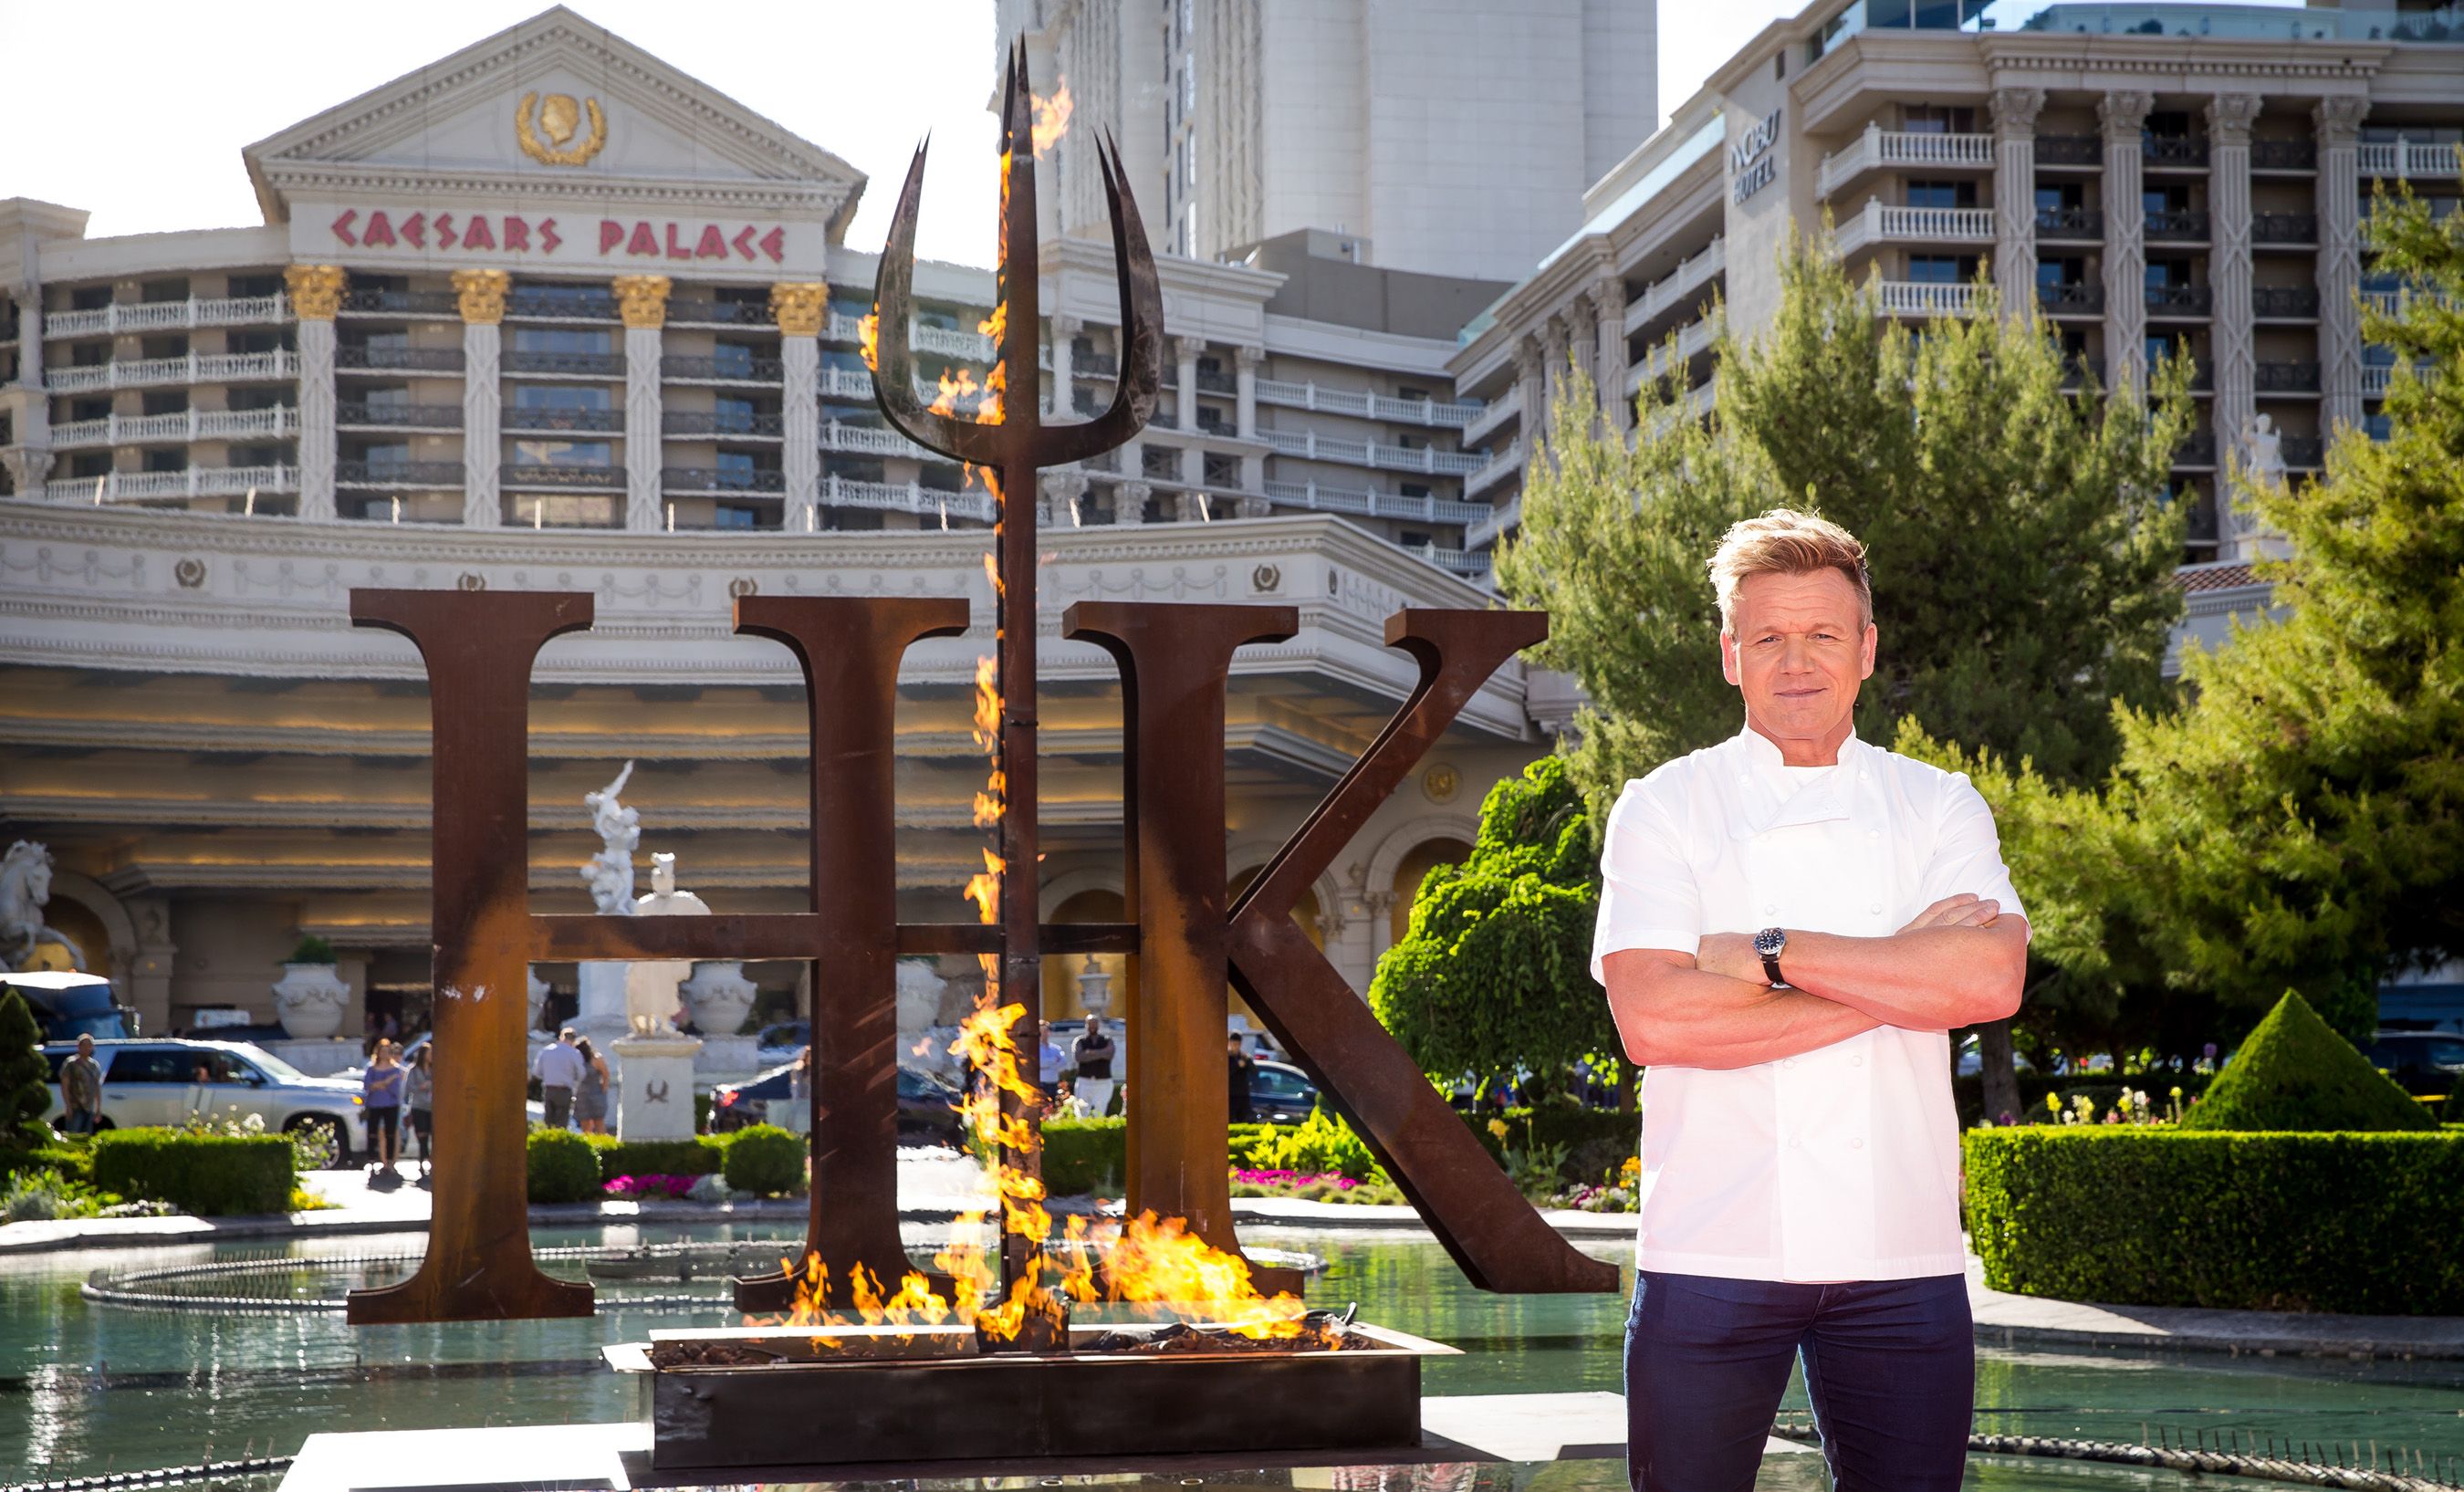 Where is Gordon Ramsay's Hell's kitchen New York?